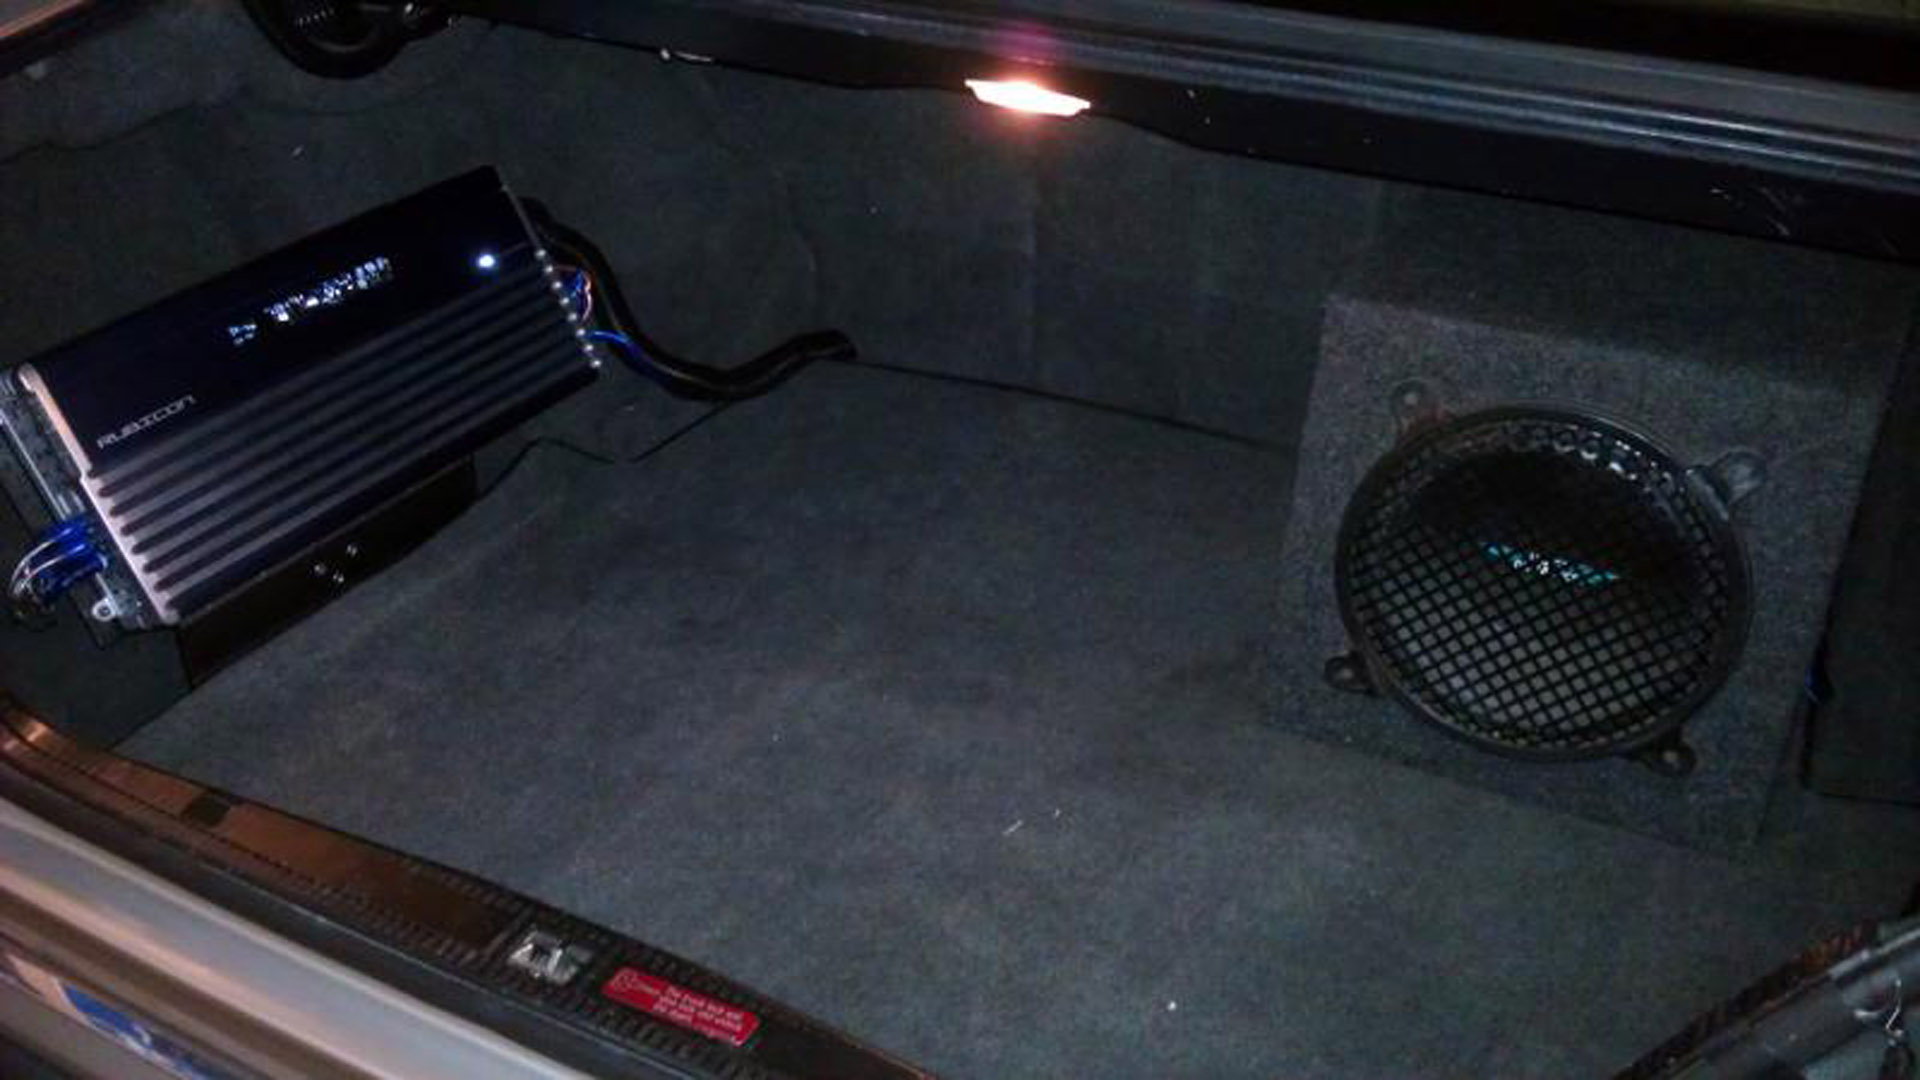 how to install a powered subwoofer to a factory stereo